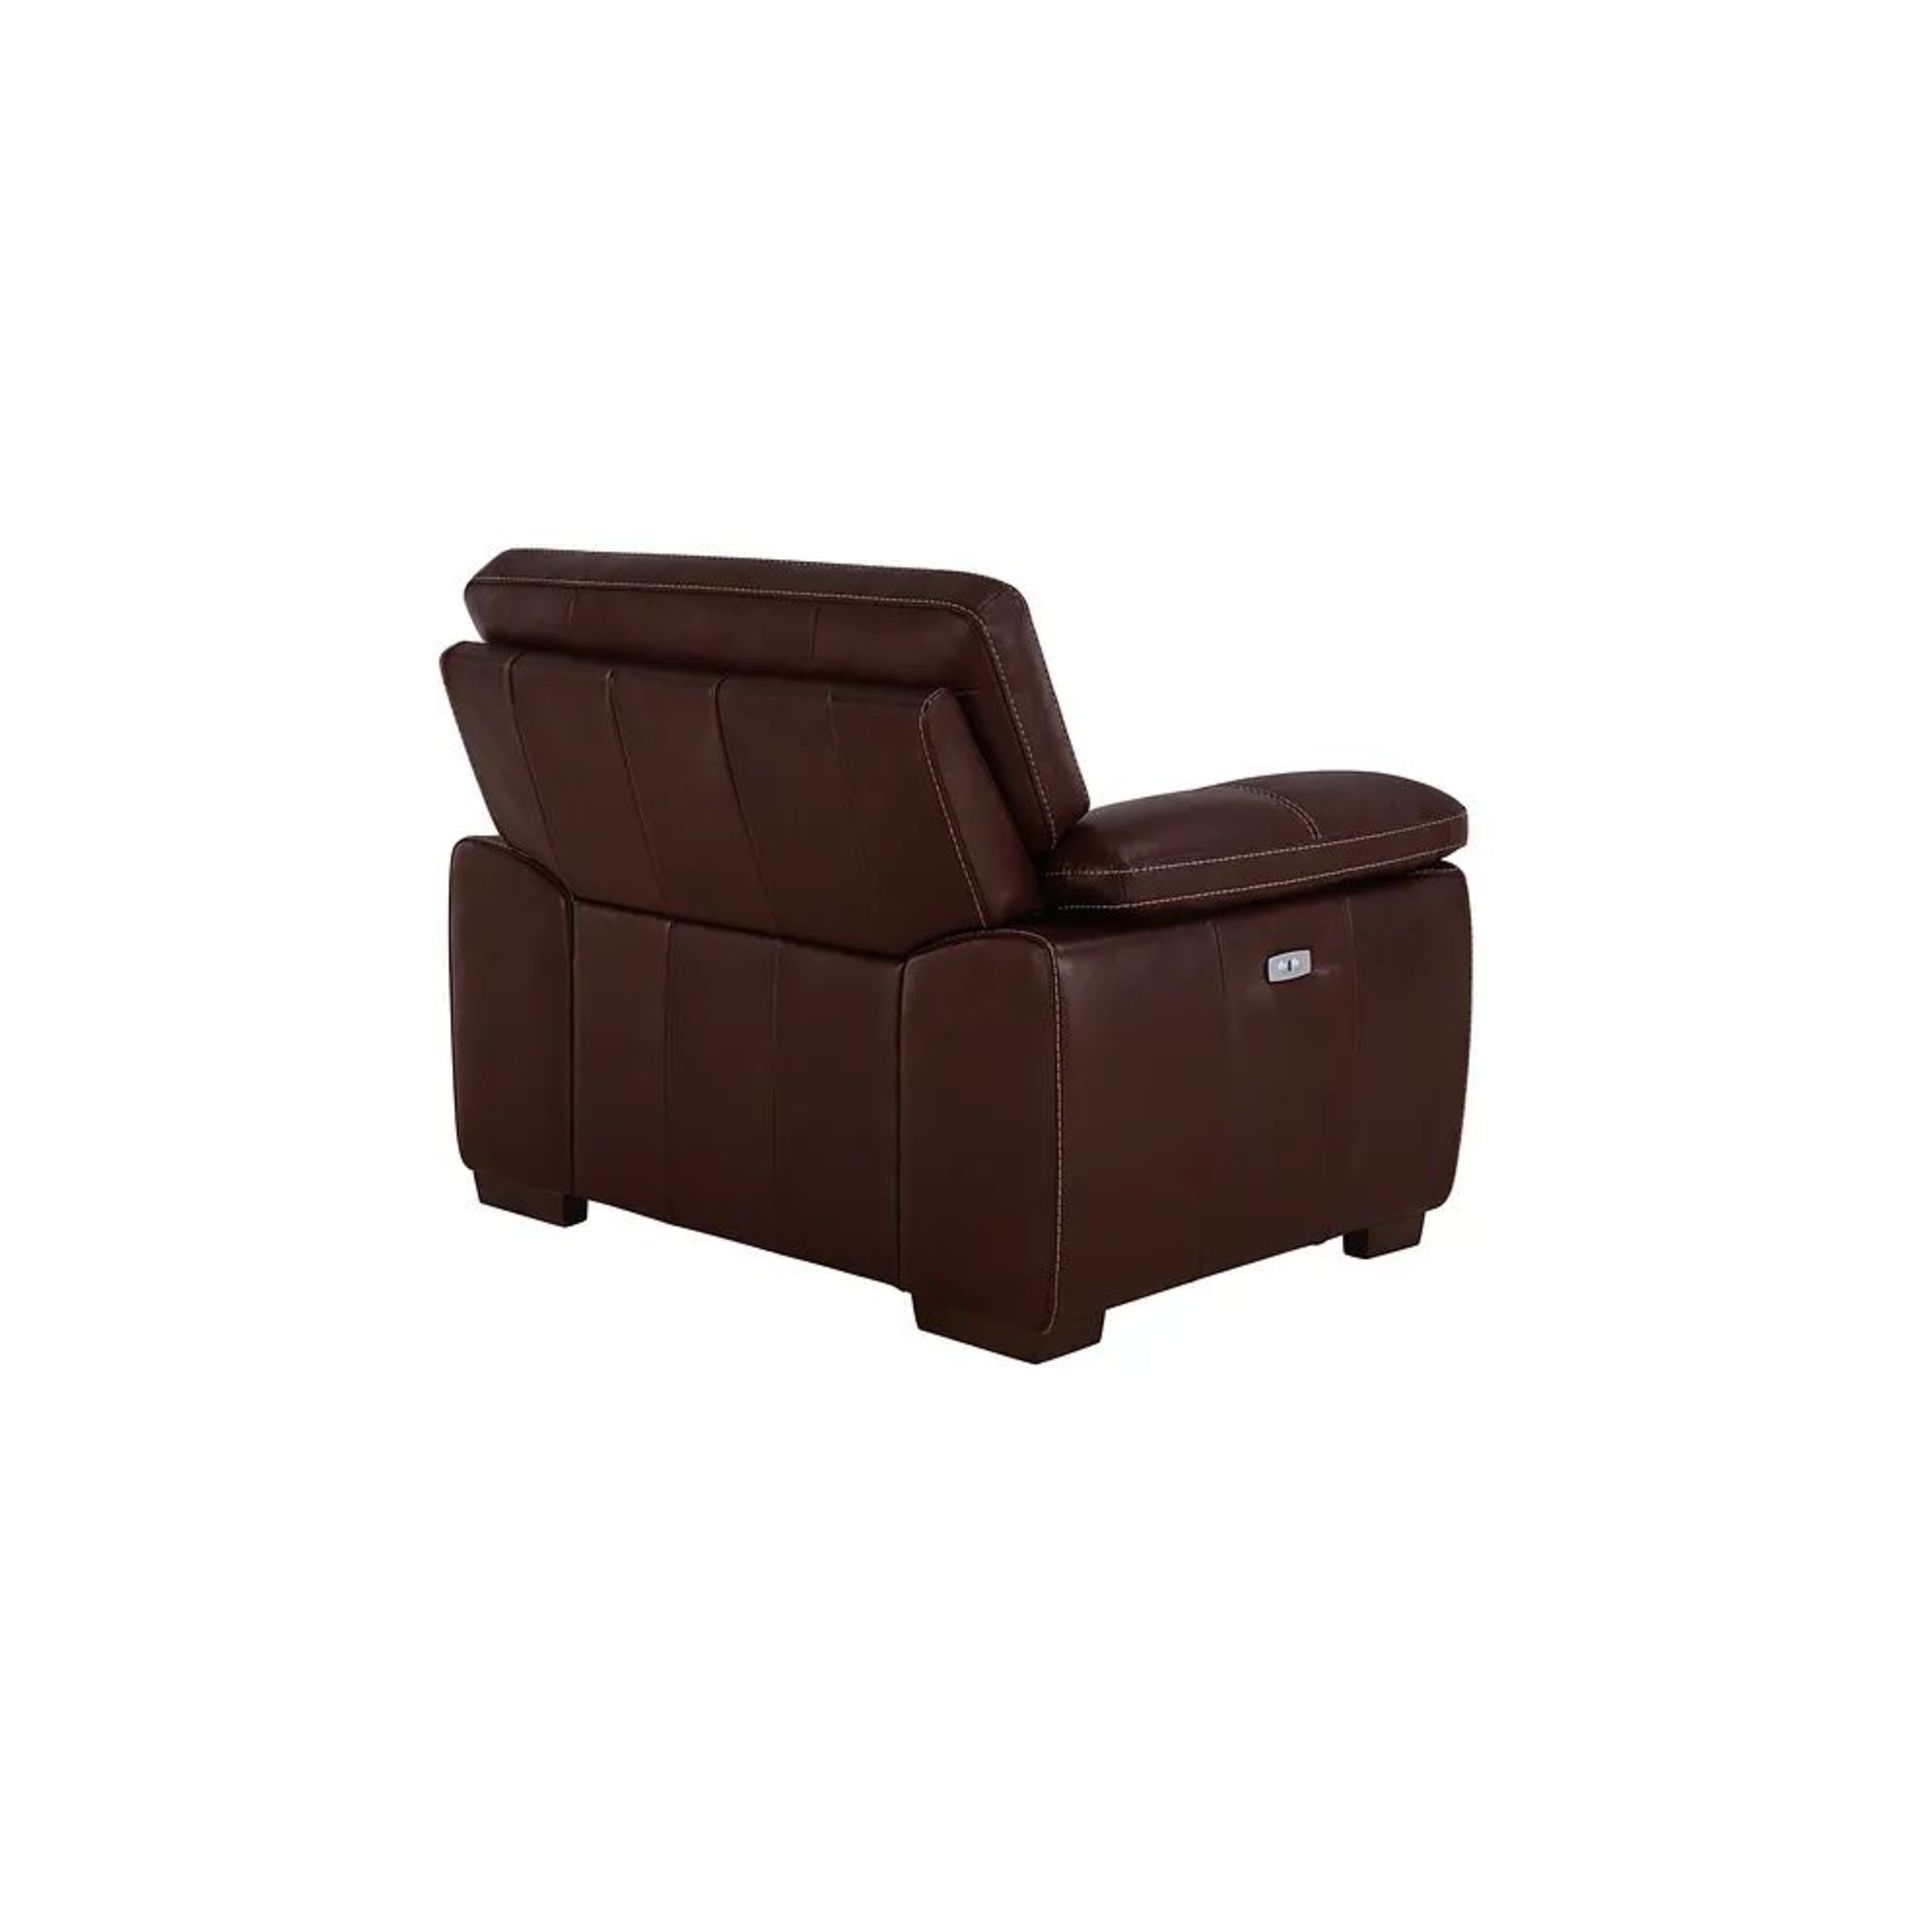 BRAND NEW ARLINGTON Electric Recliner Armchair - TAN LEATHER. RRP £1199. Create a traditional and - Image 5 of 12